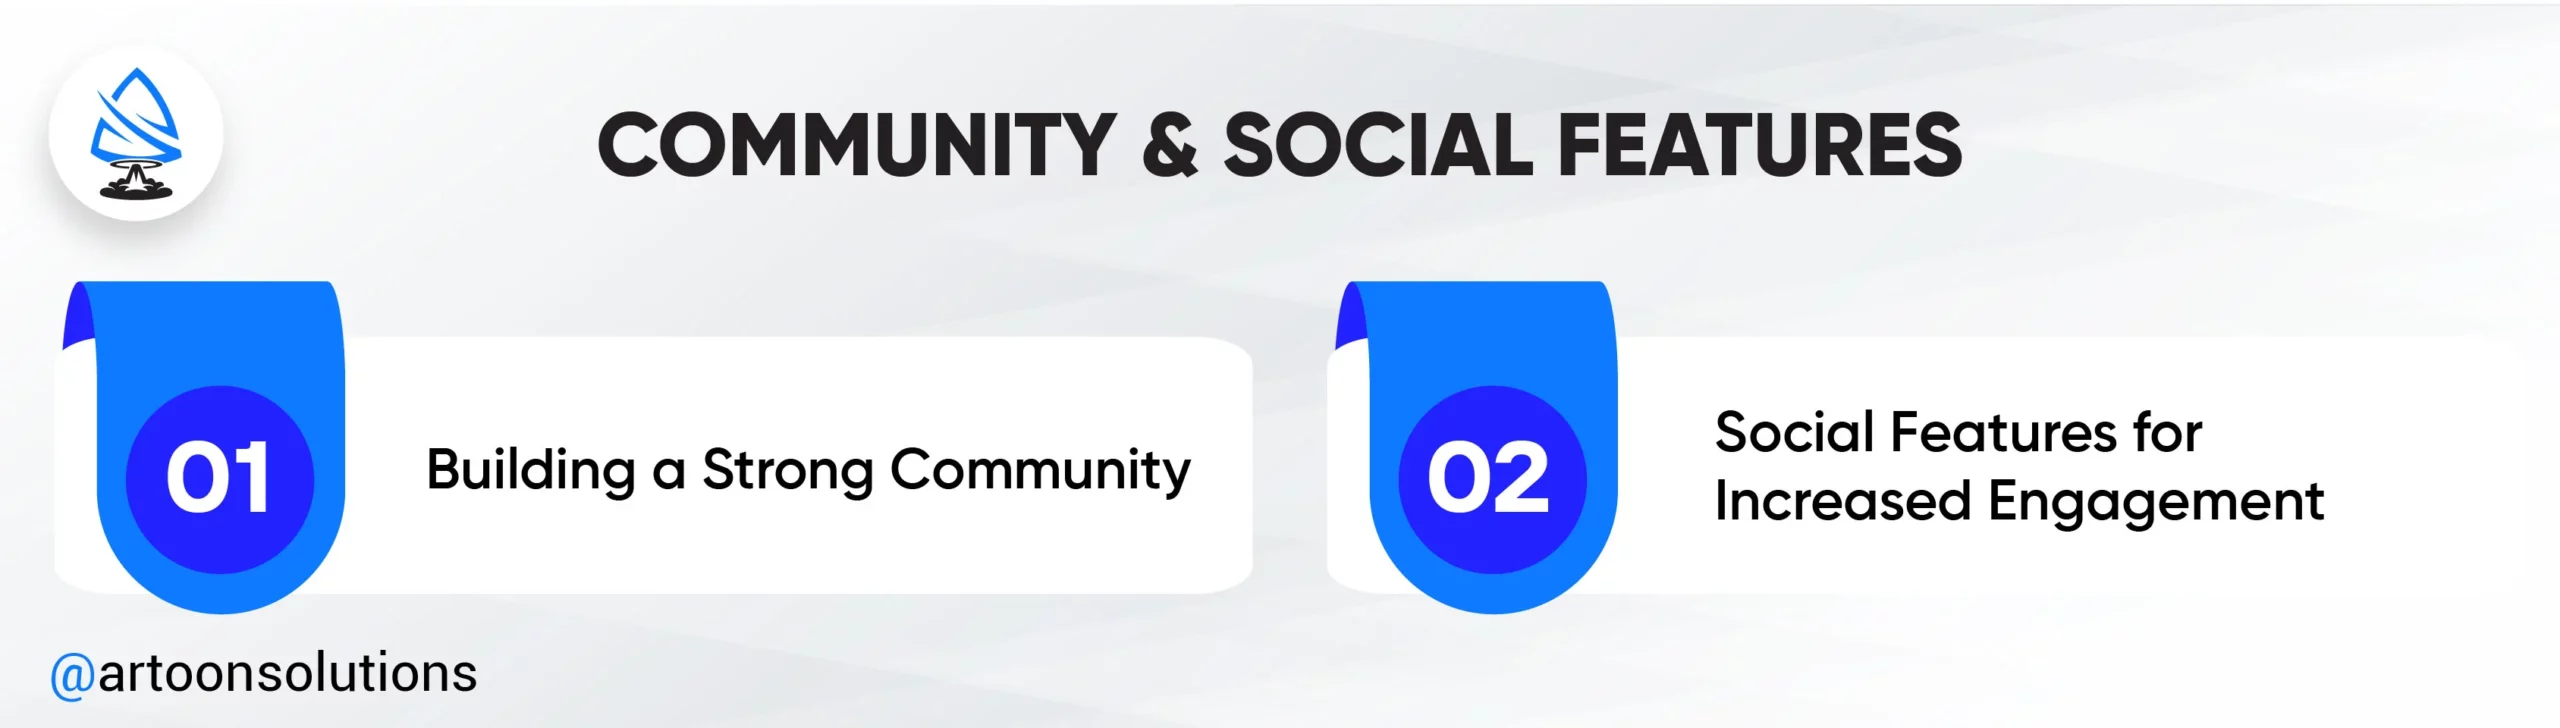 Community and Social Features